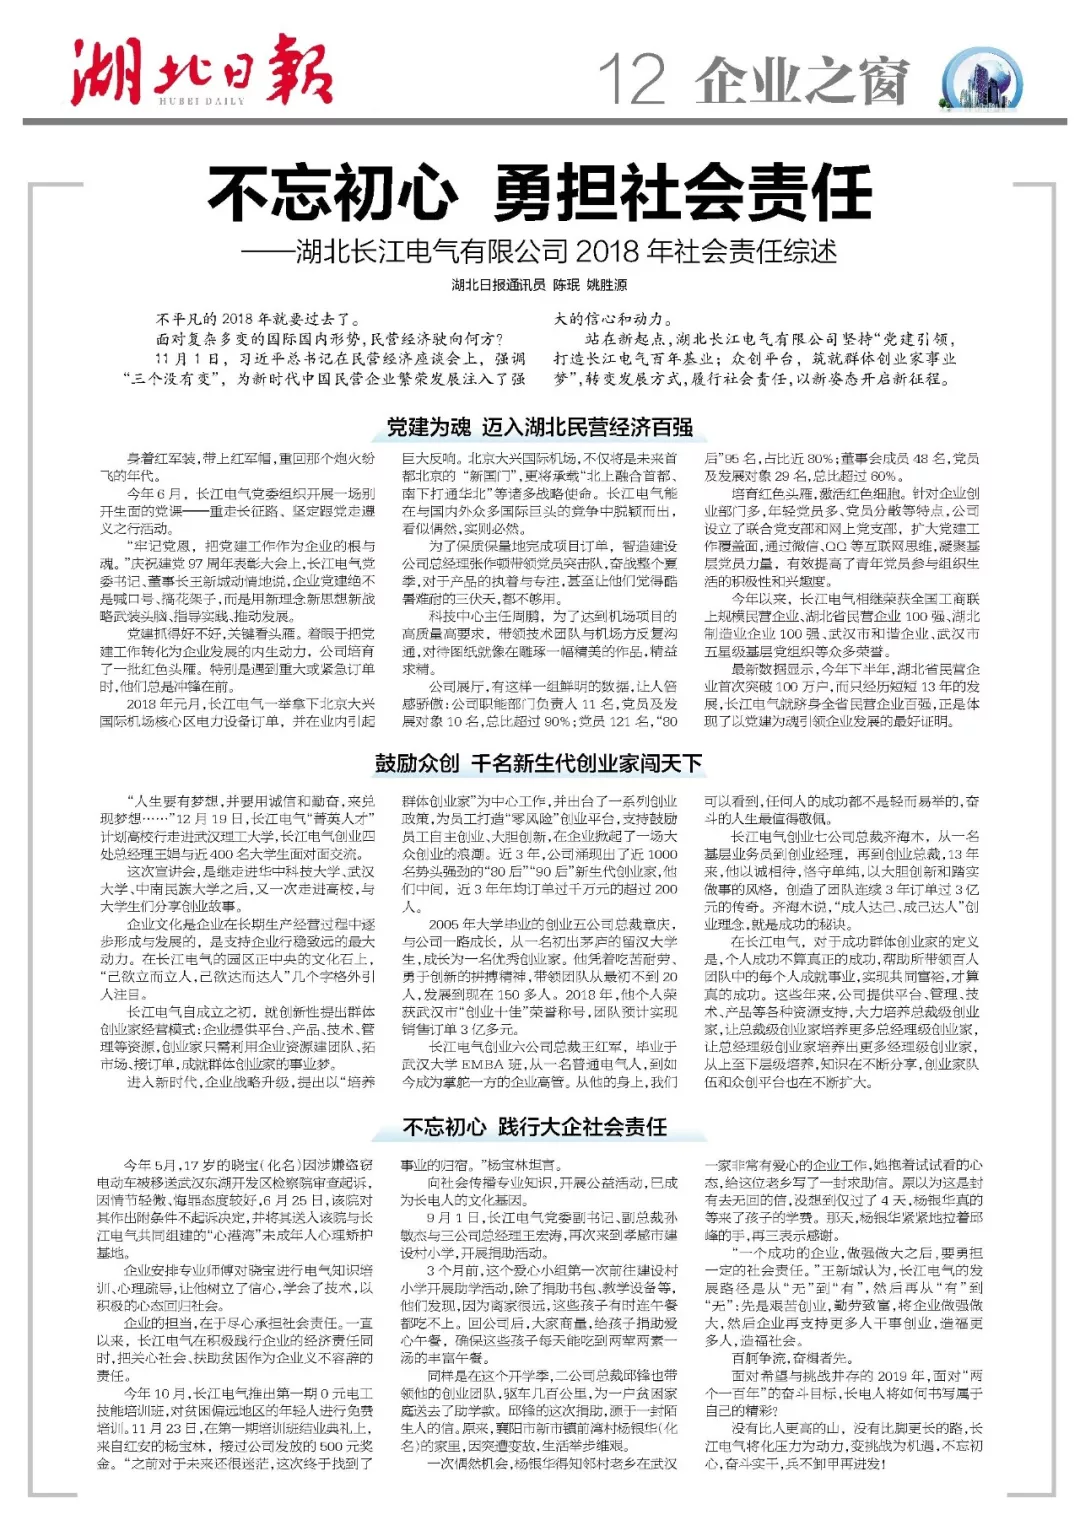 "Hubei Daily" headline report|Do not forget the initial heart and take the social responsibility - Hubei Changjiang Electric Co., Ltd. 2018 social responsibility review